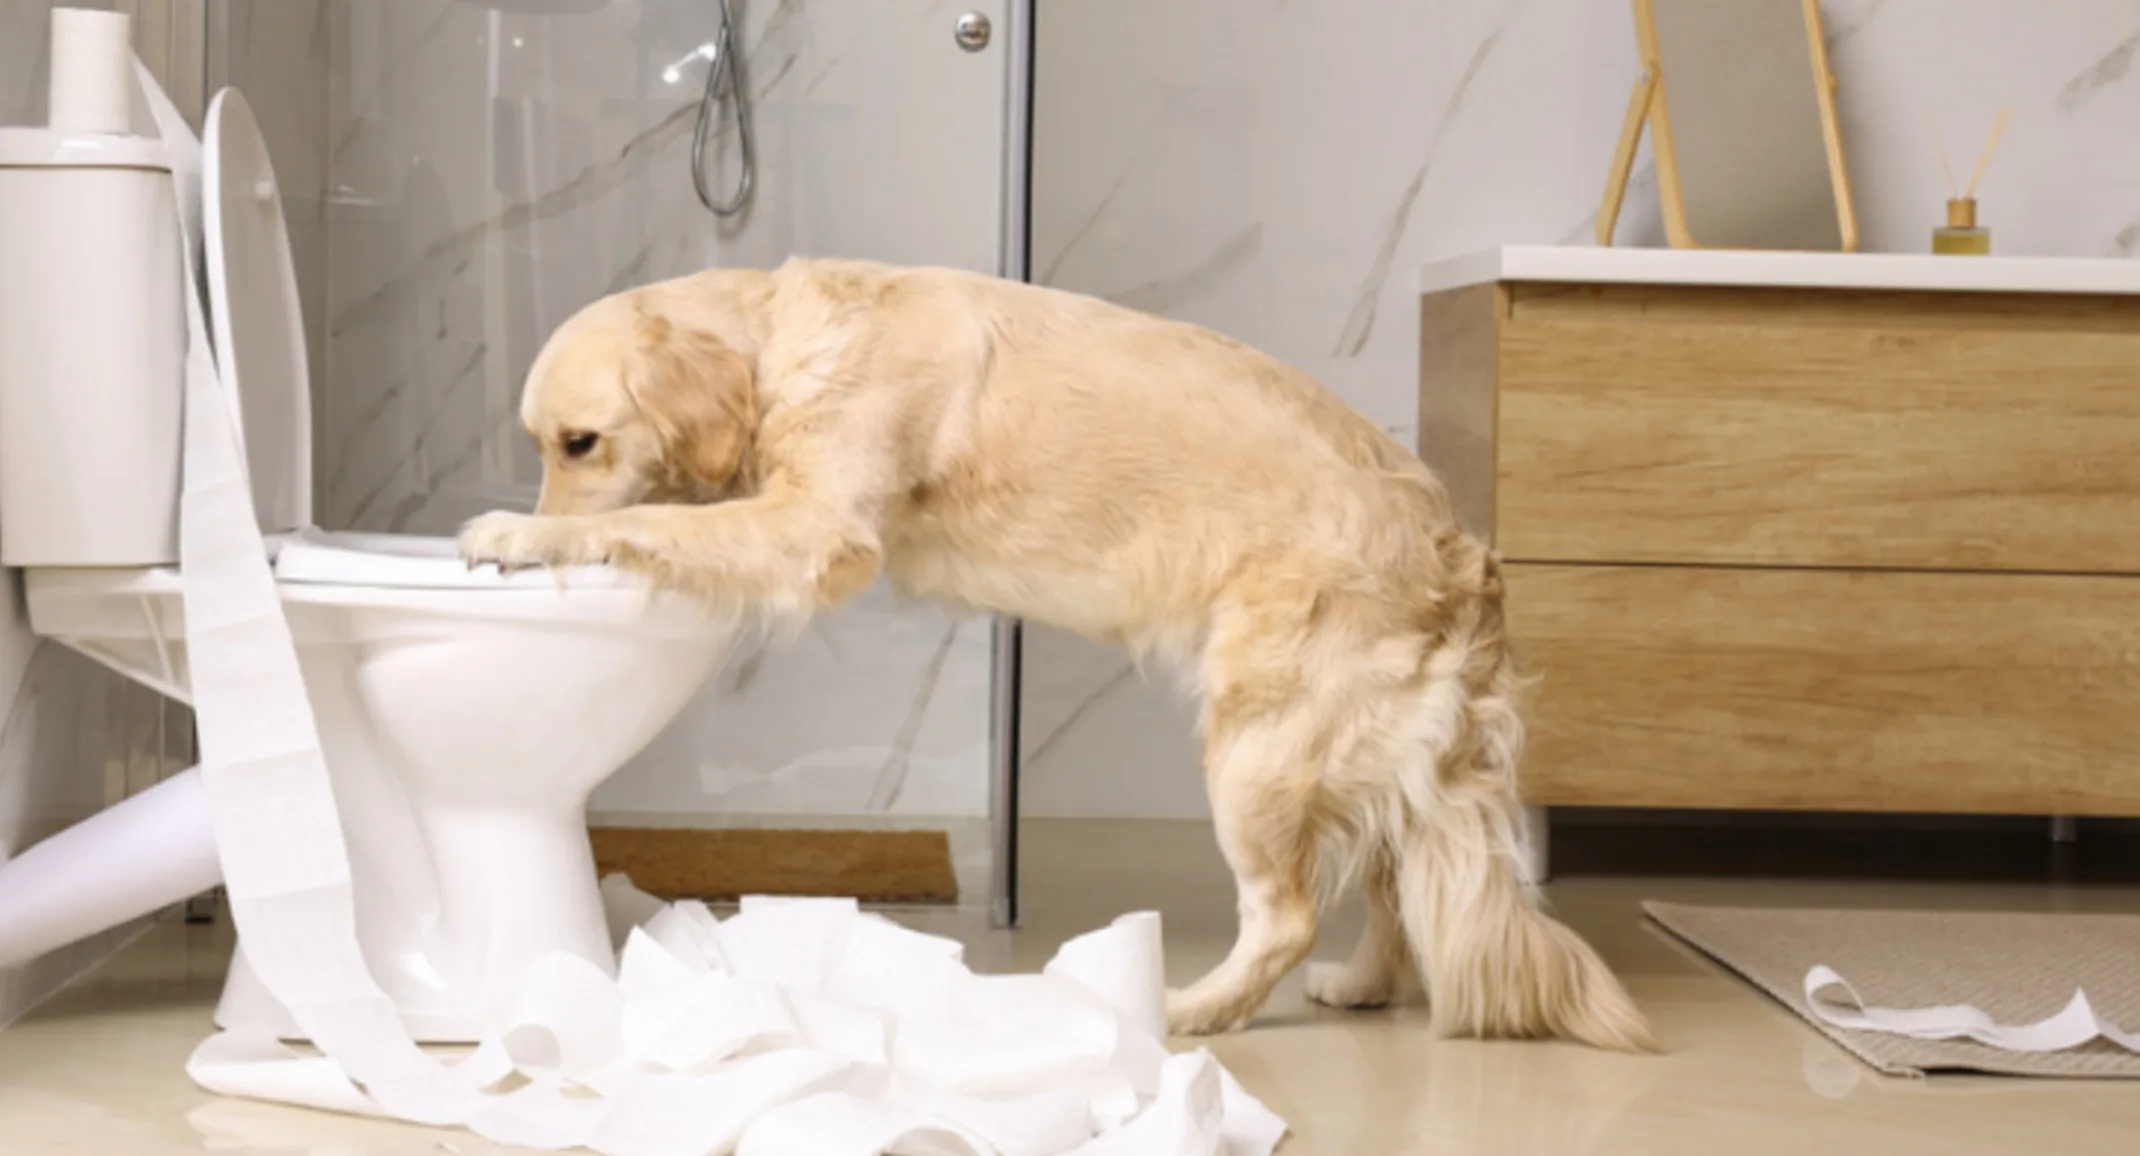 Dog Drinking From a Toilet